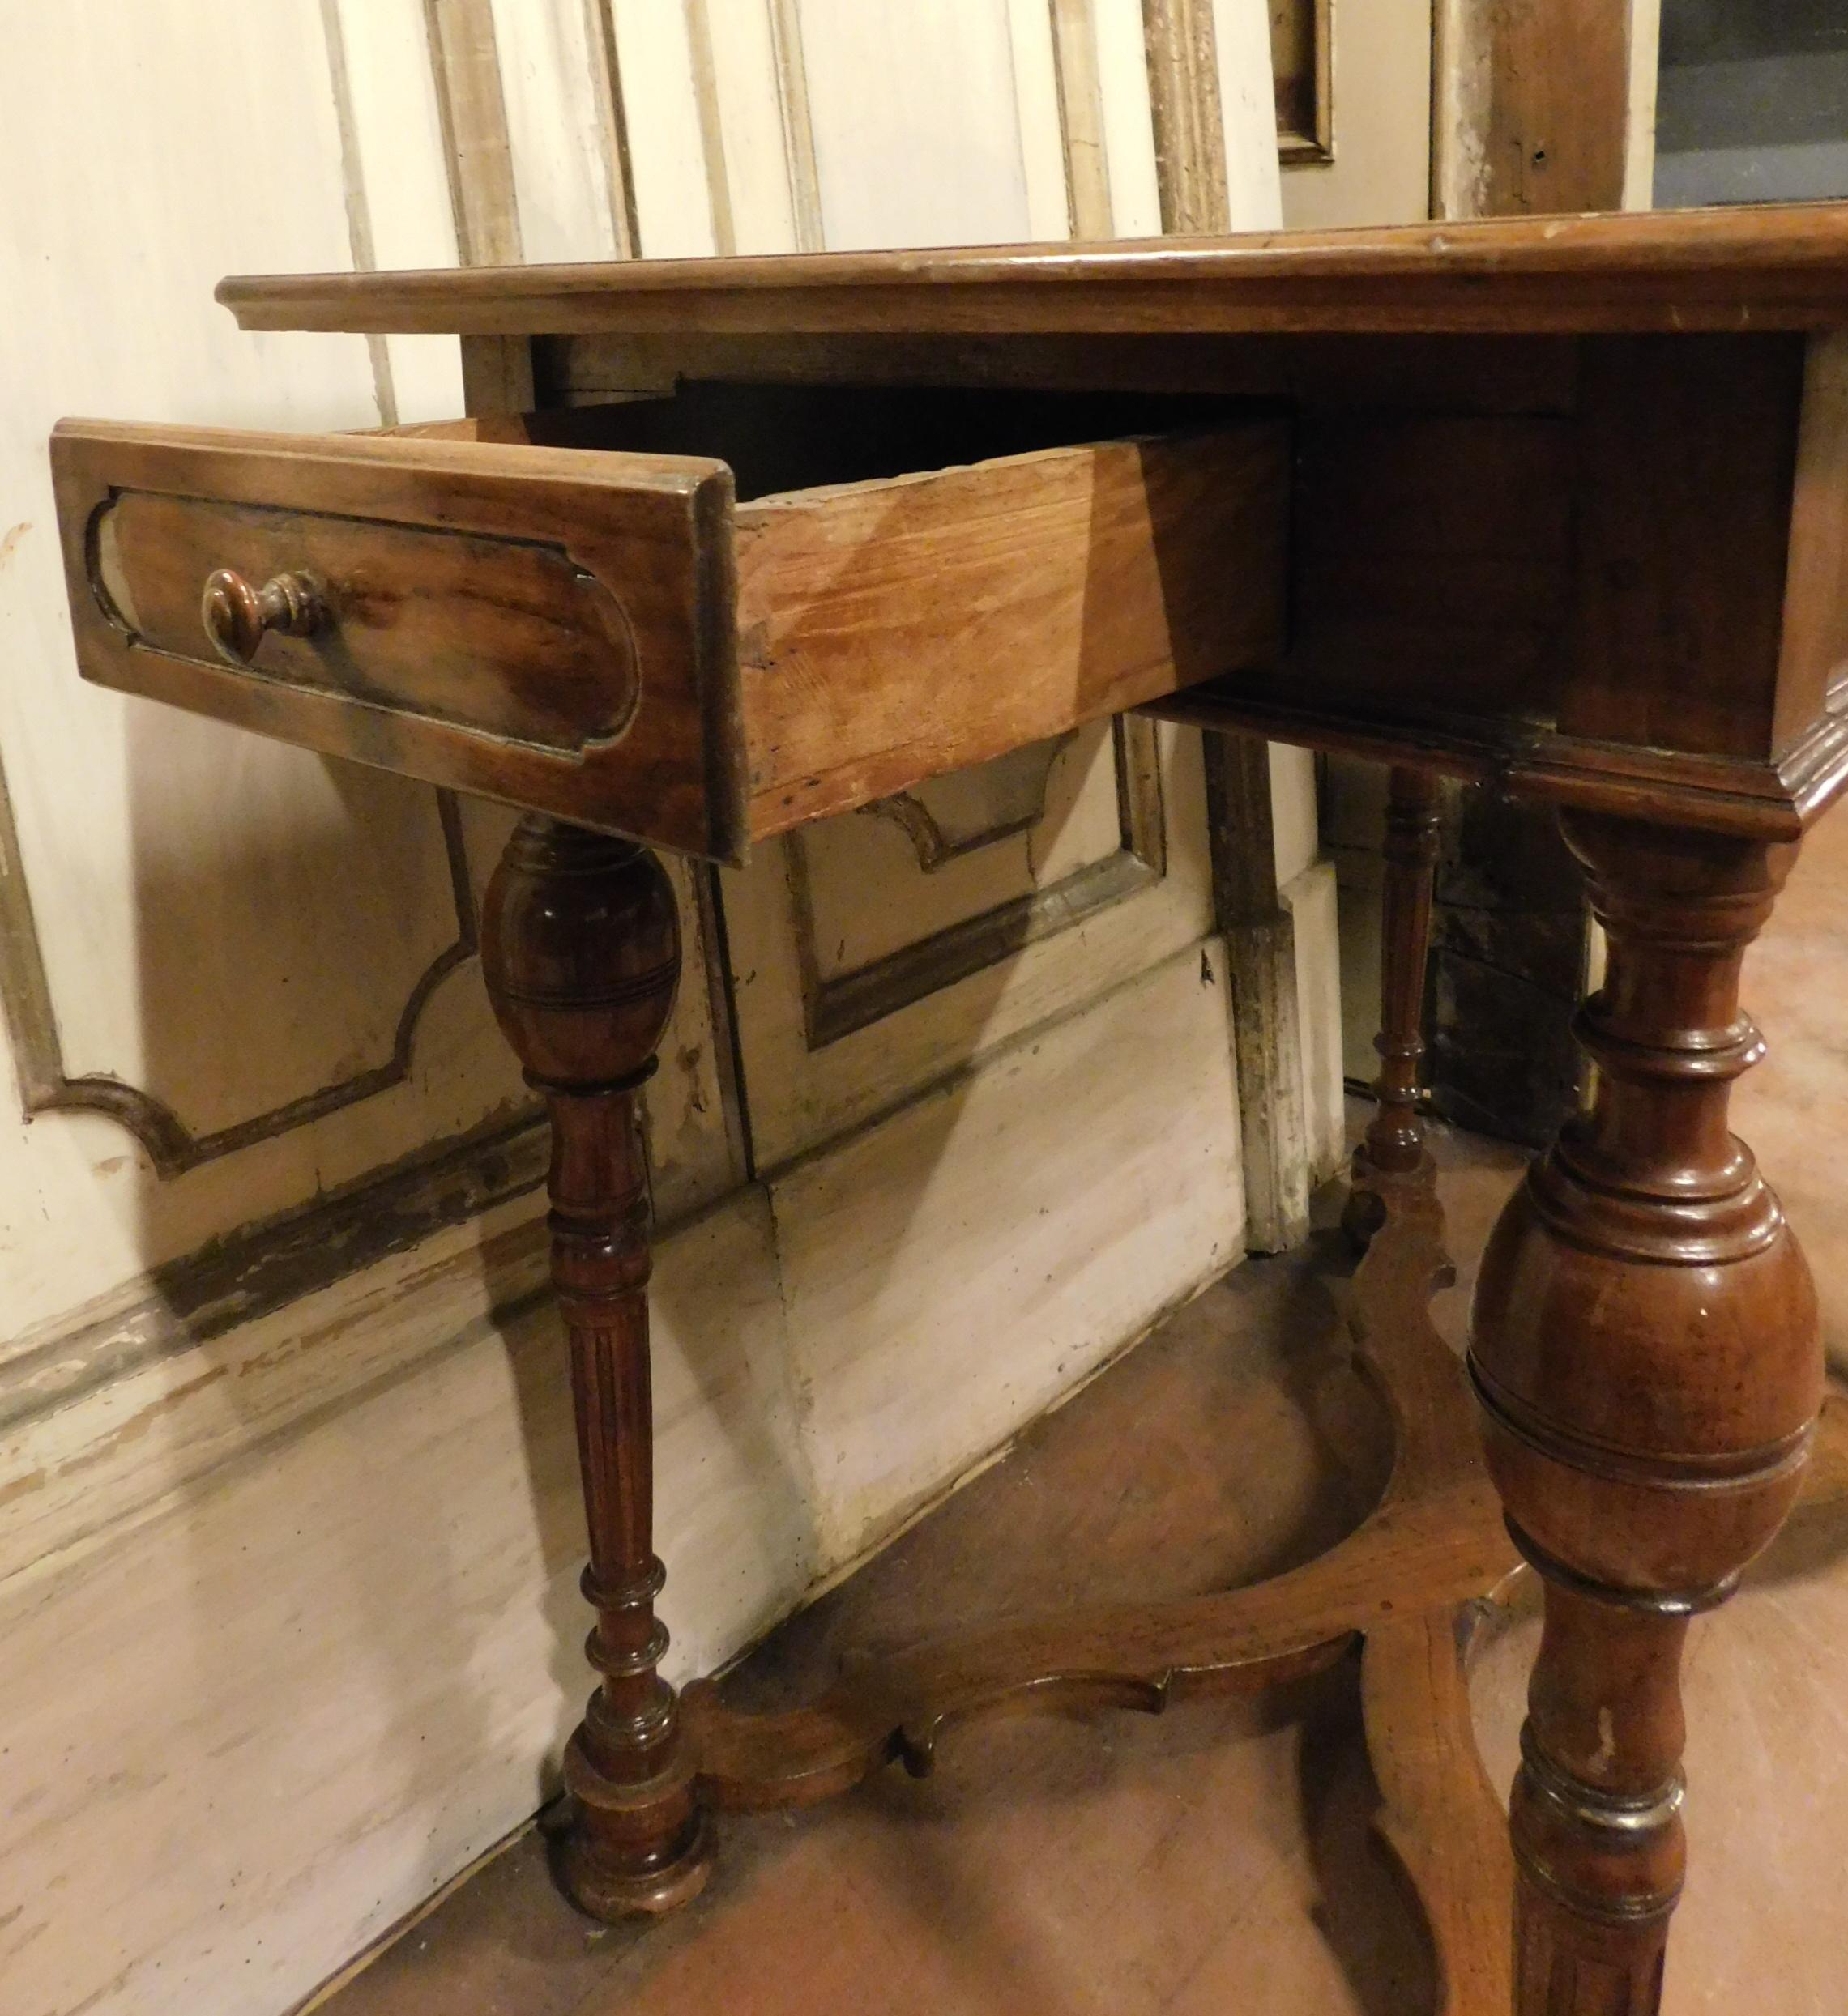 Antique Cherry Wood Table with Hand Carved Legs, 18th Century, Italy For Sale 4